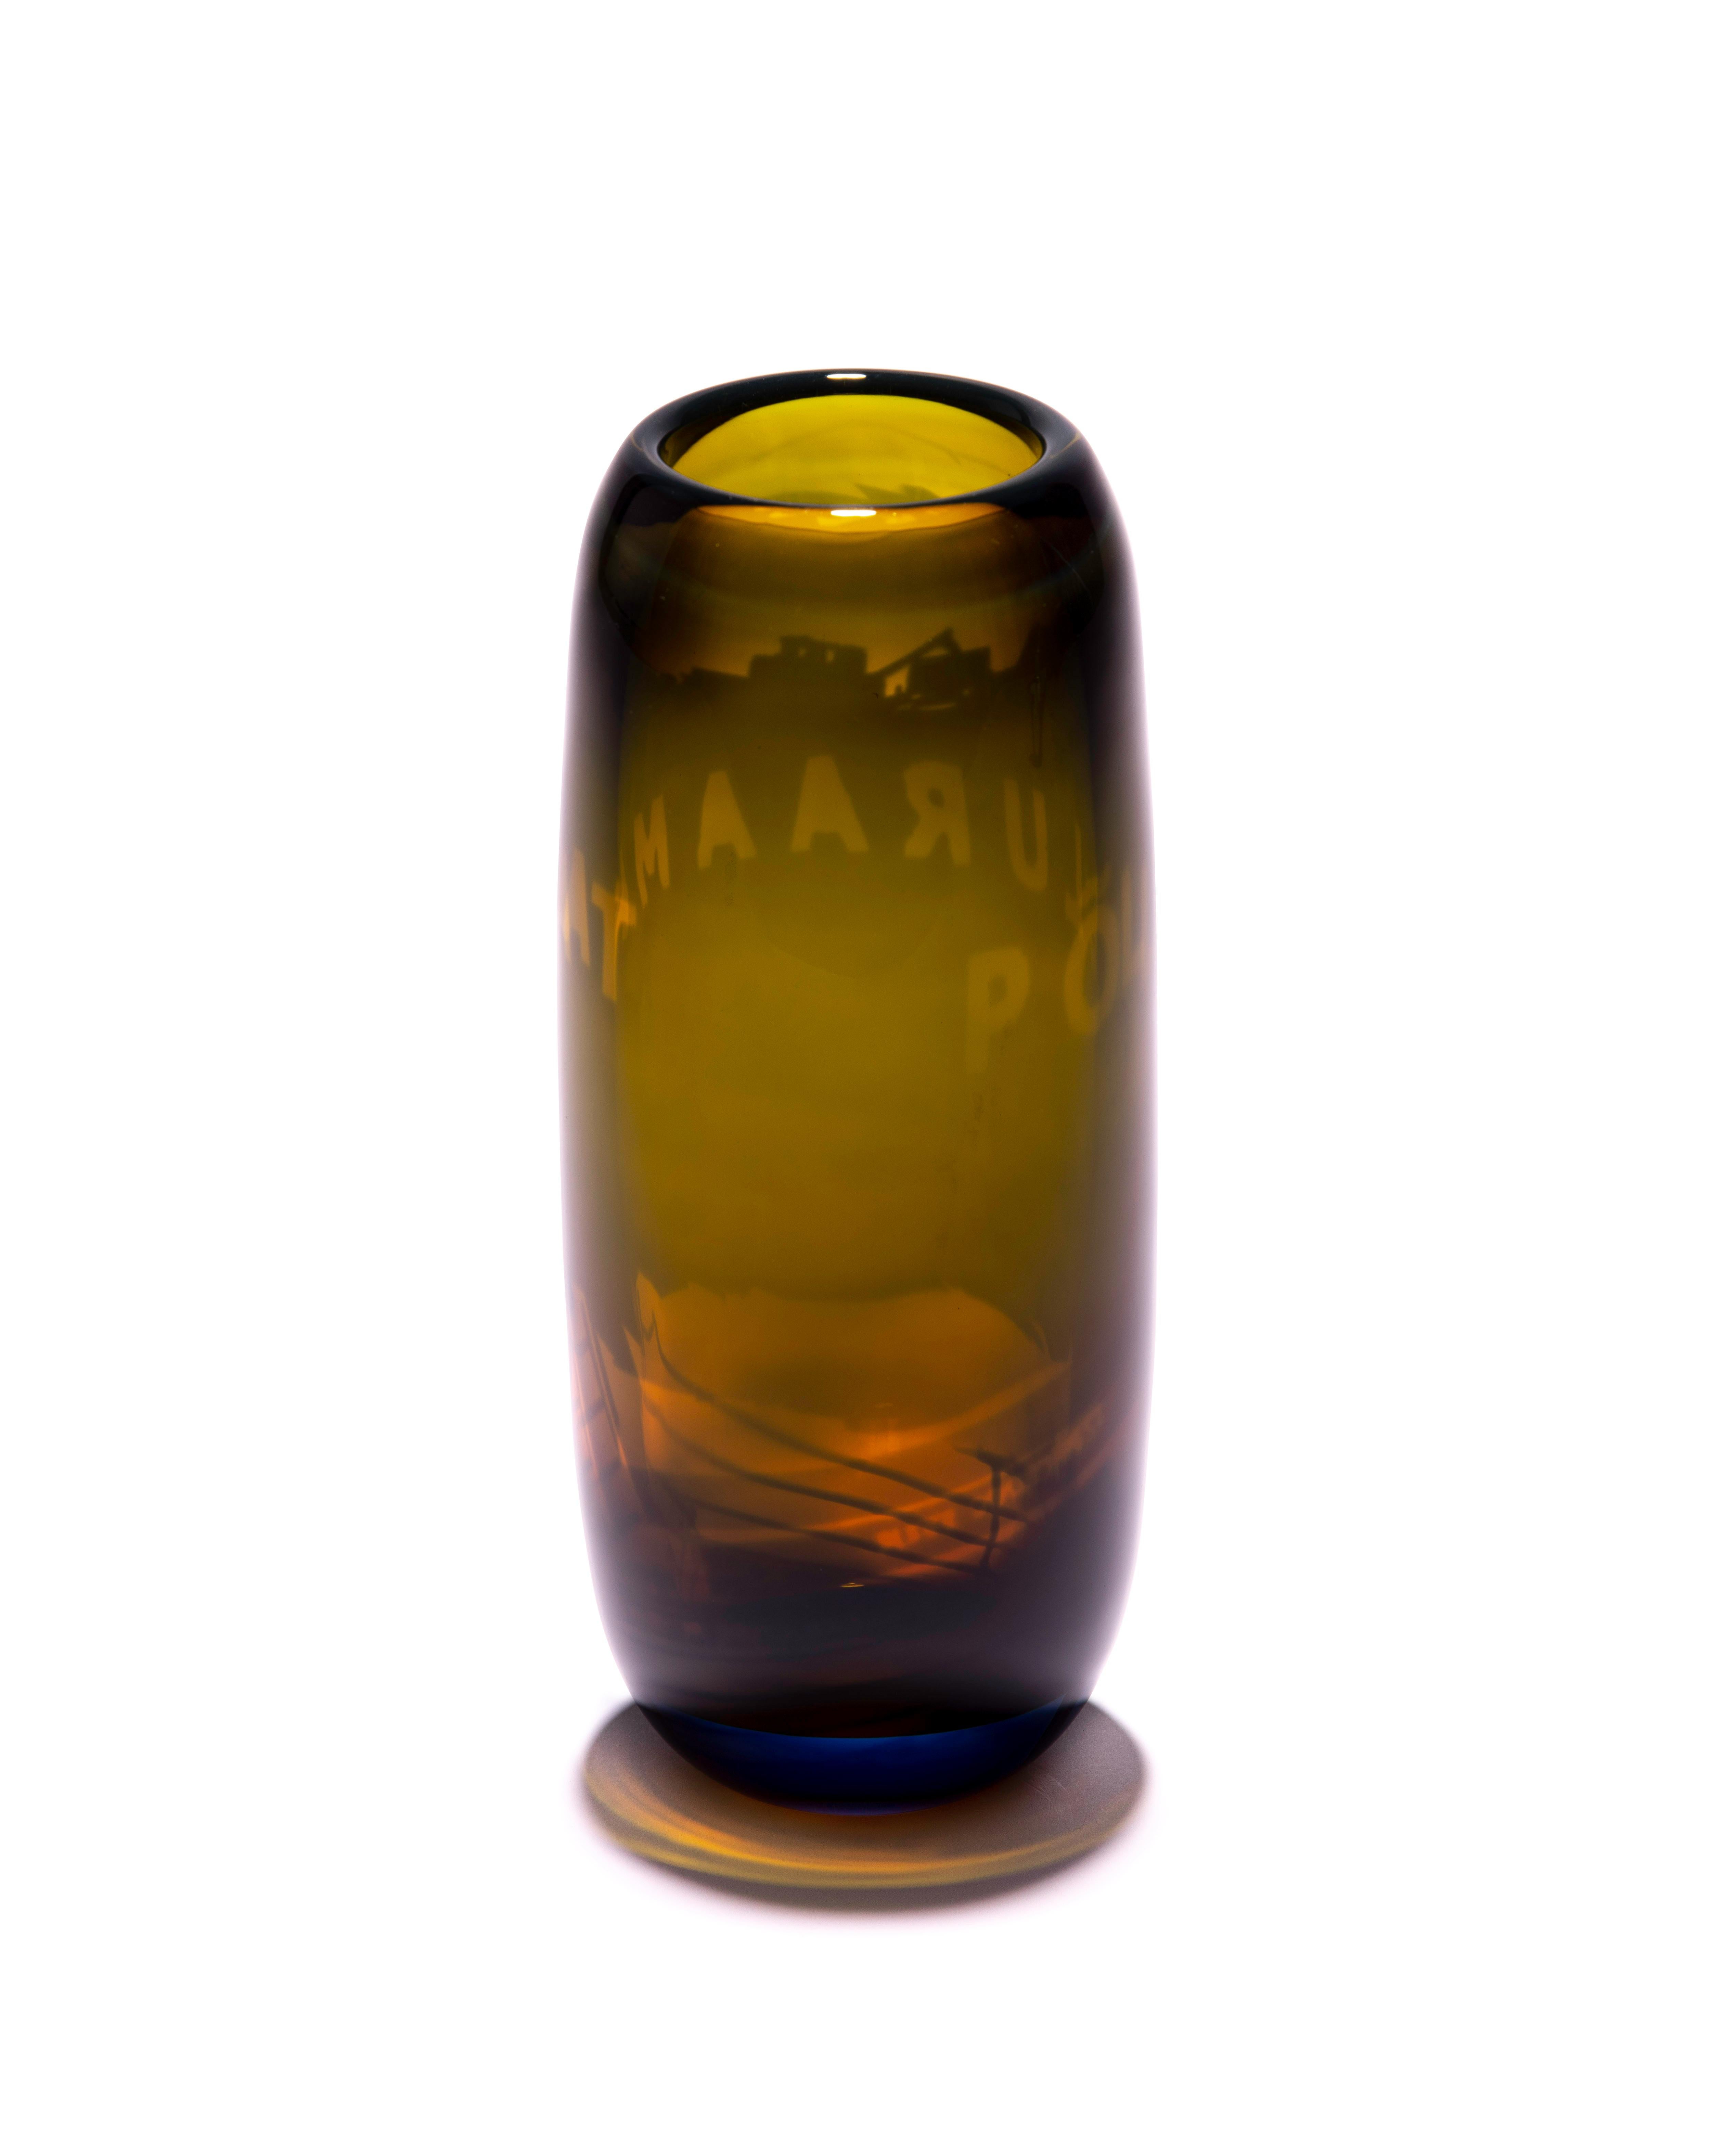 Unique Harvest Graal brown glass vase by Tiina Sarapu,
2018
Dimensions: H 30 cm
Materials: Glass

Glass in my works signifies the world between opaque and translucent, visible and invisible, material and immaterial, real and unreal. It is a